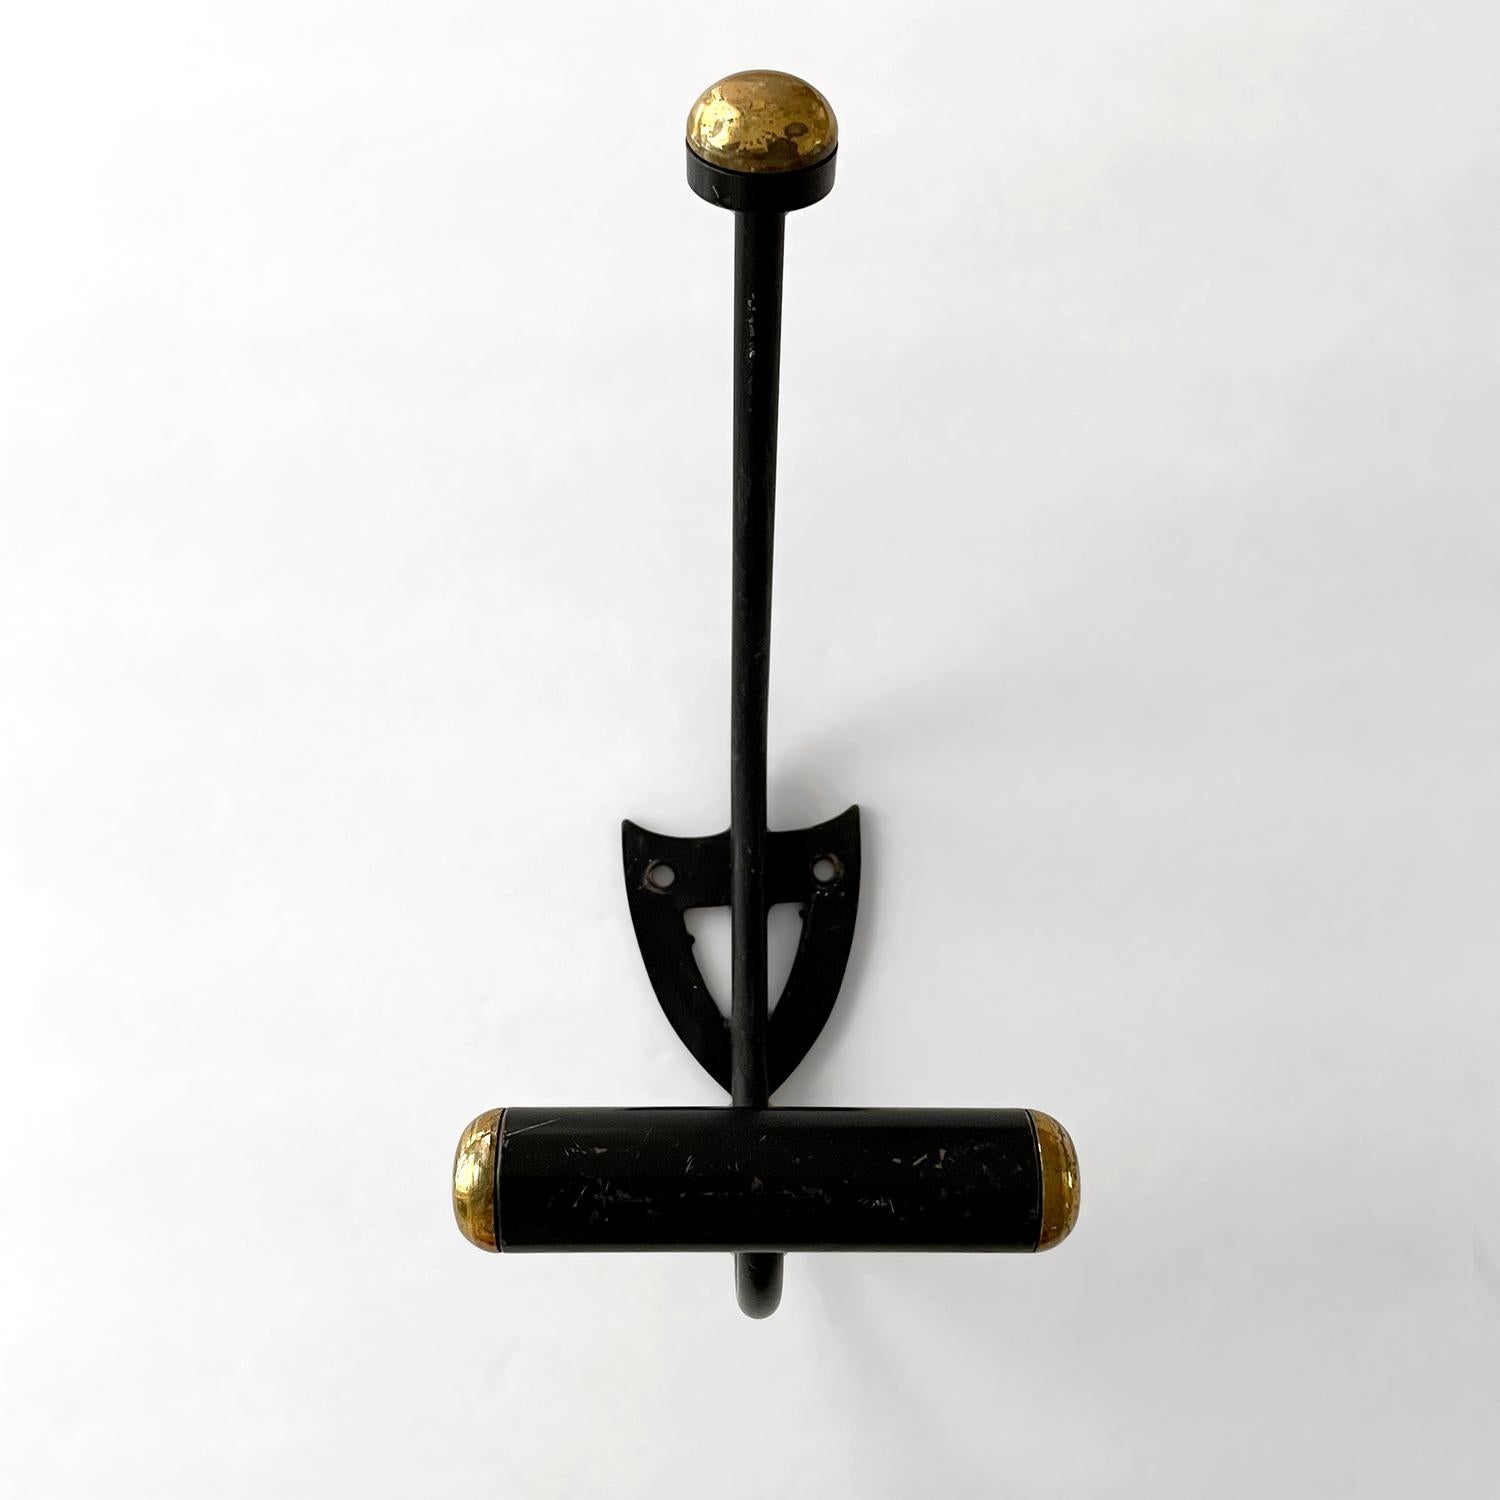 French iron double wall hooks
France, mid century
Beautifully contrasted iron with brass accents creates a palette to please    
Angled iron upper arm is finished with a rounded brass toned cap
Lower arm supports a rounded bar hook for wider storage